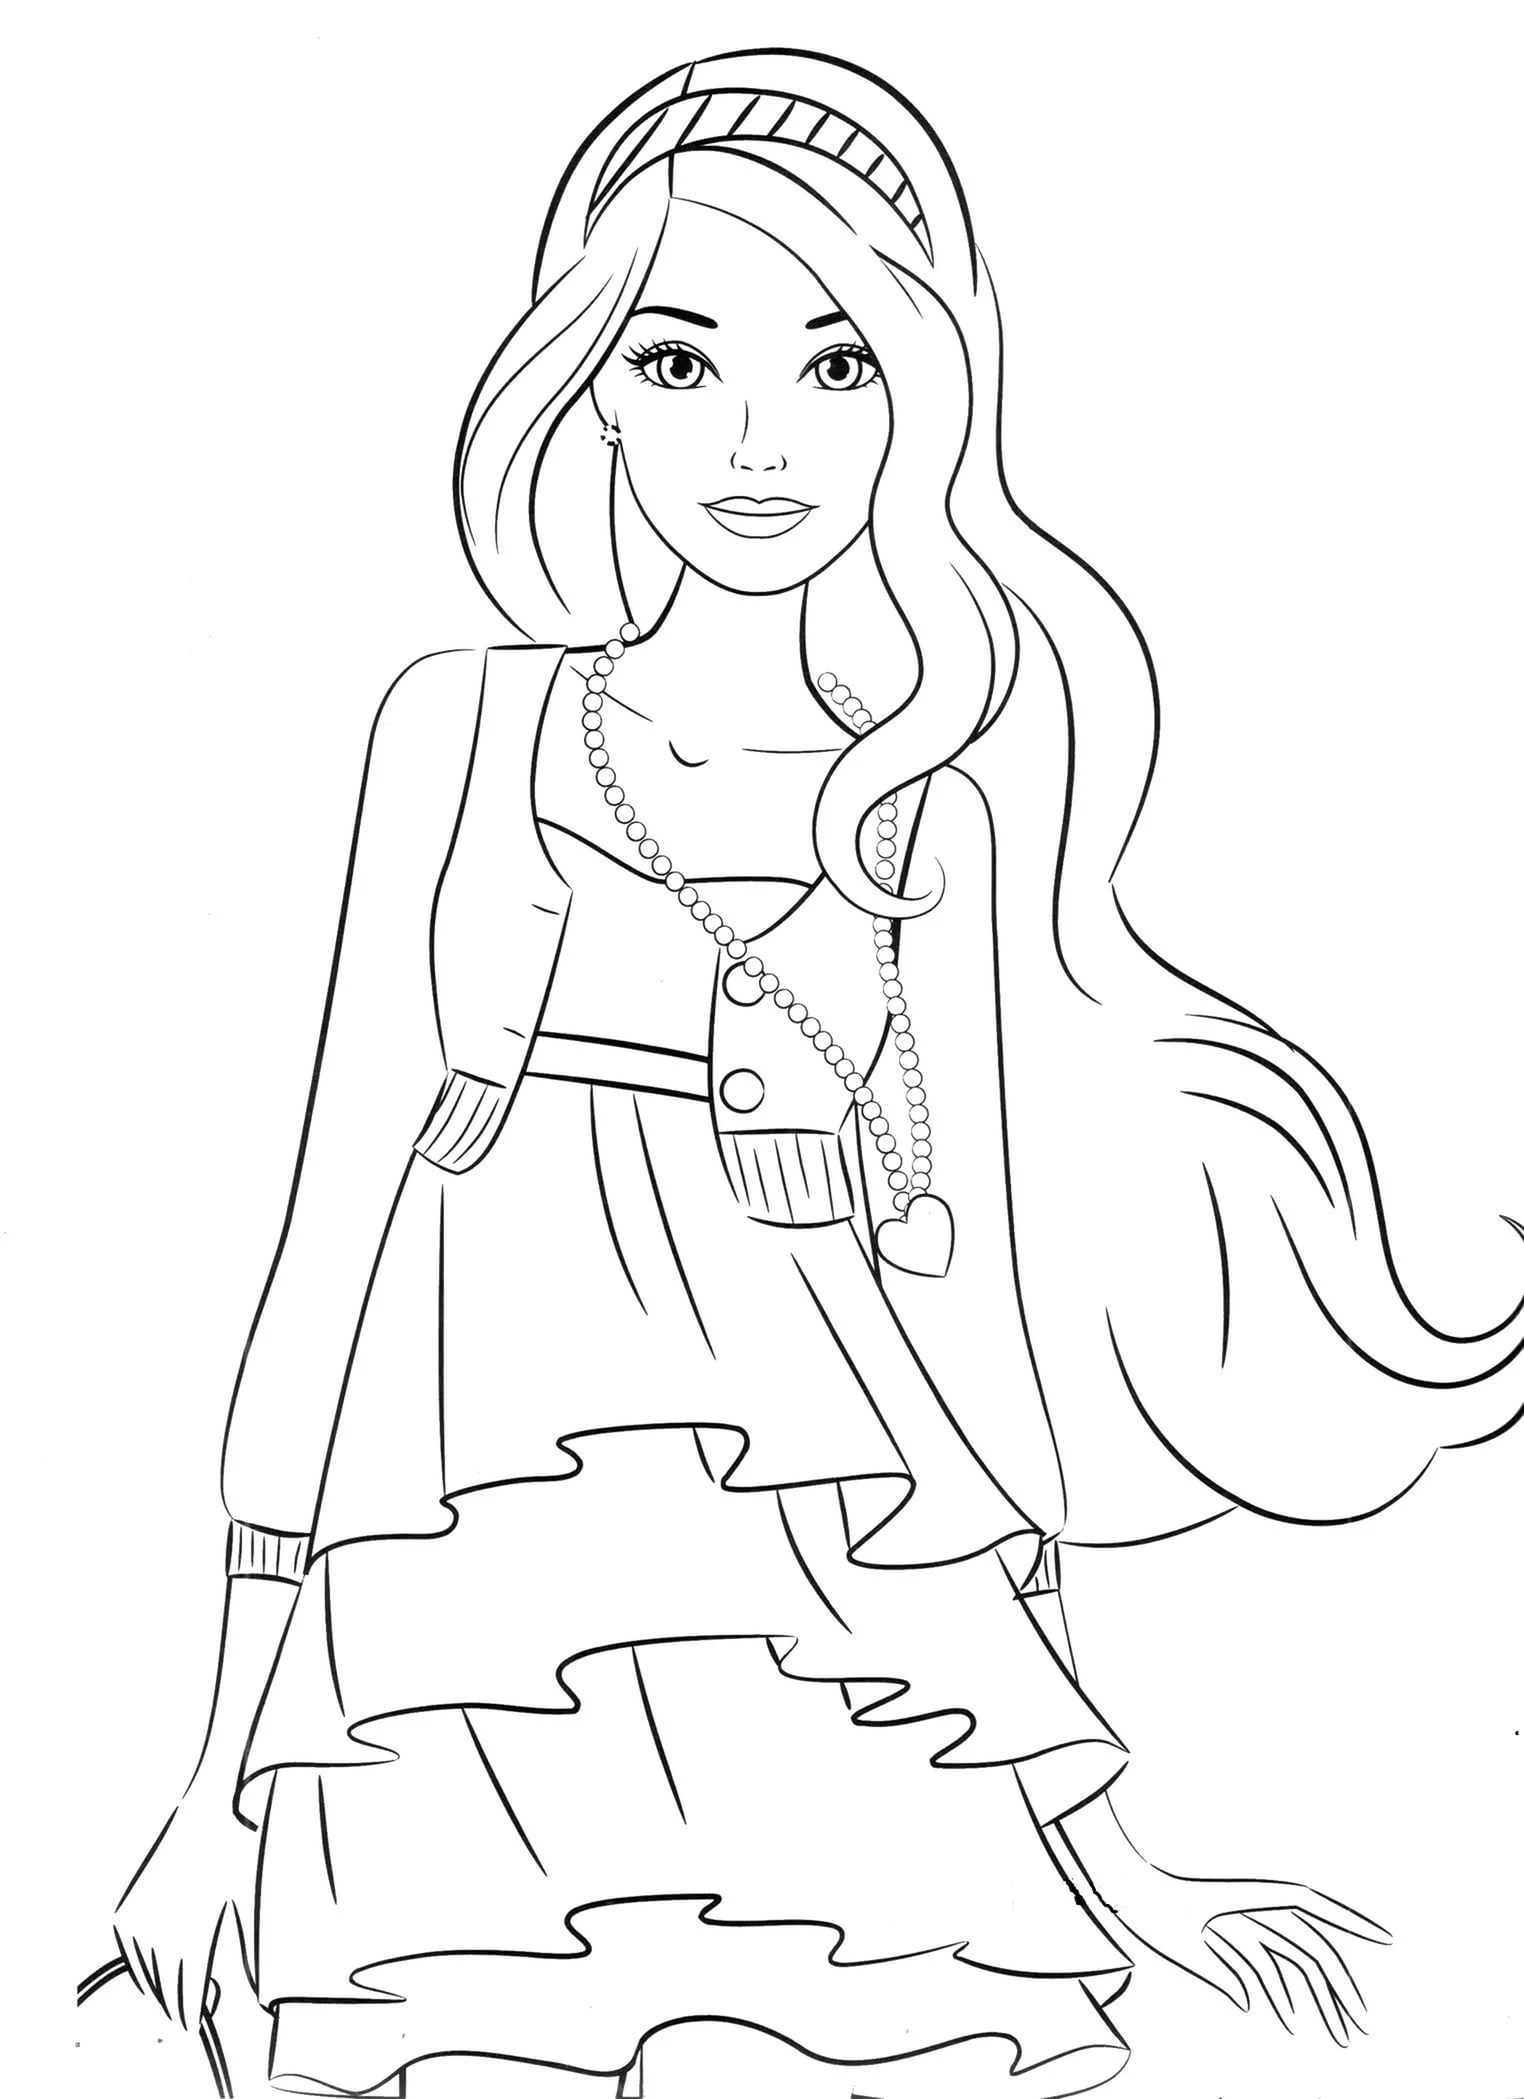 Coloring pages for 8,9,10-year old girls to download and 